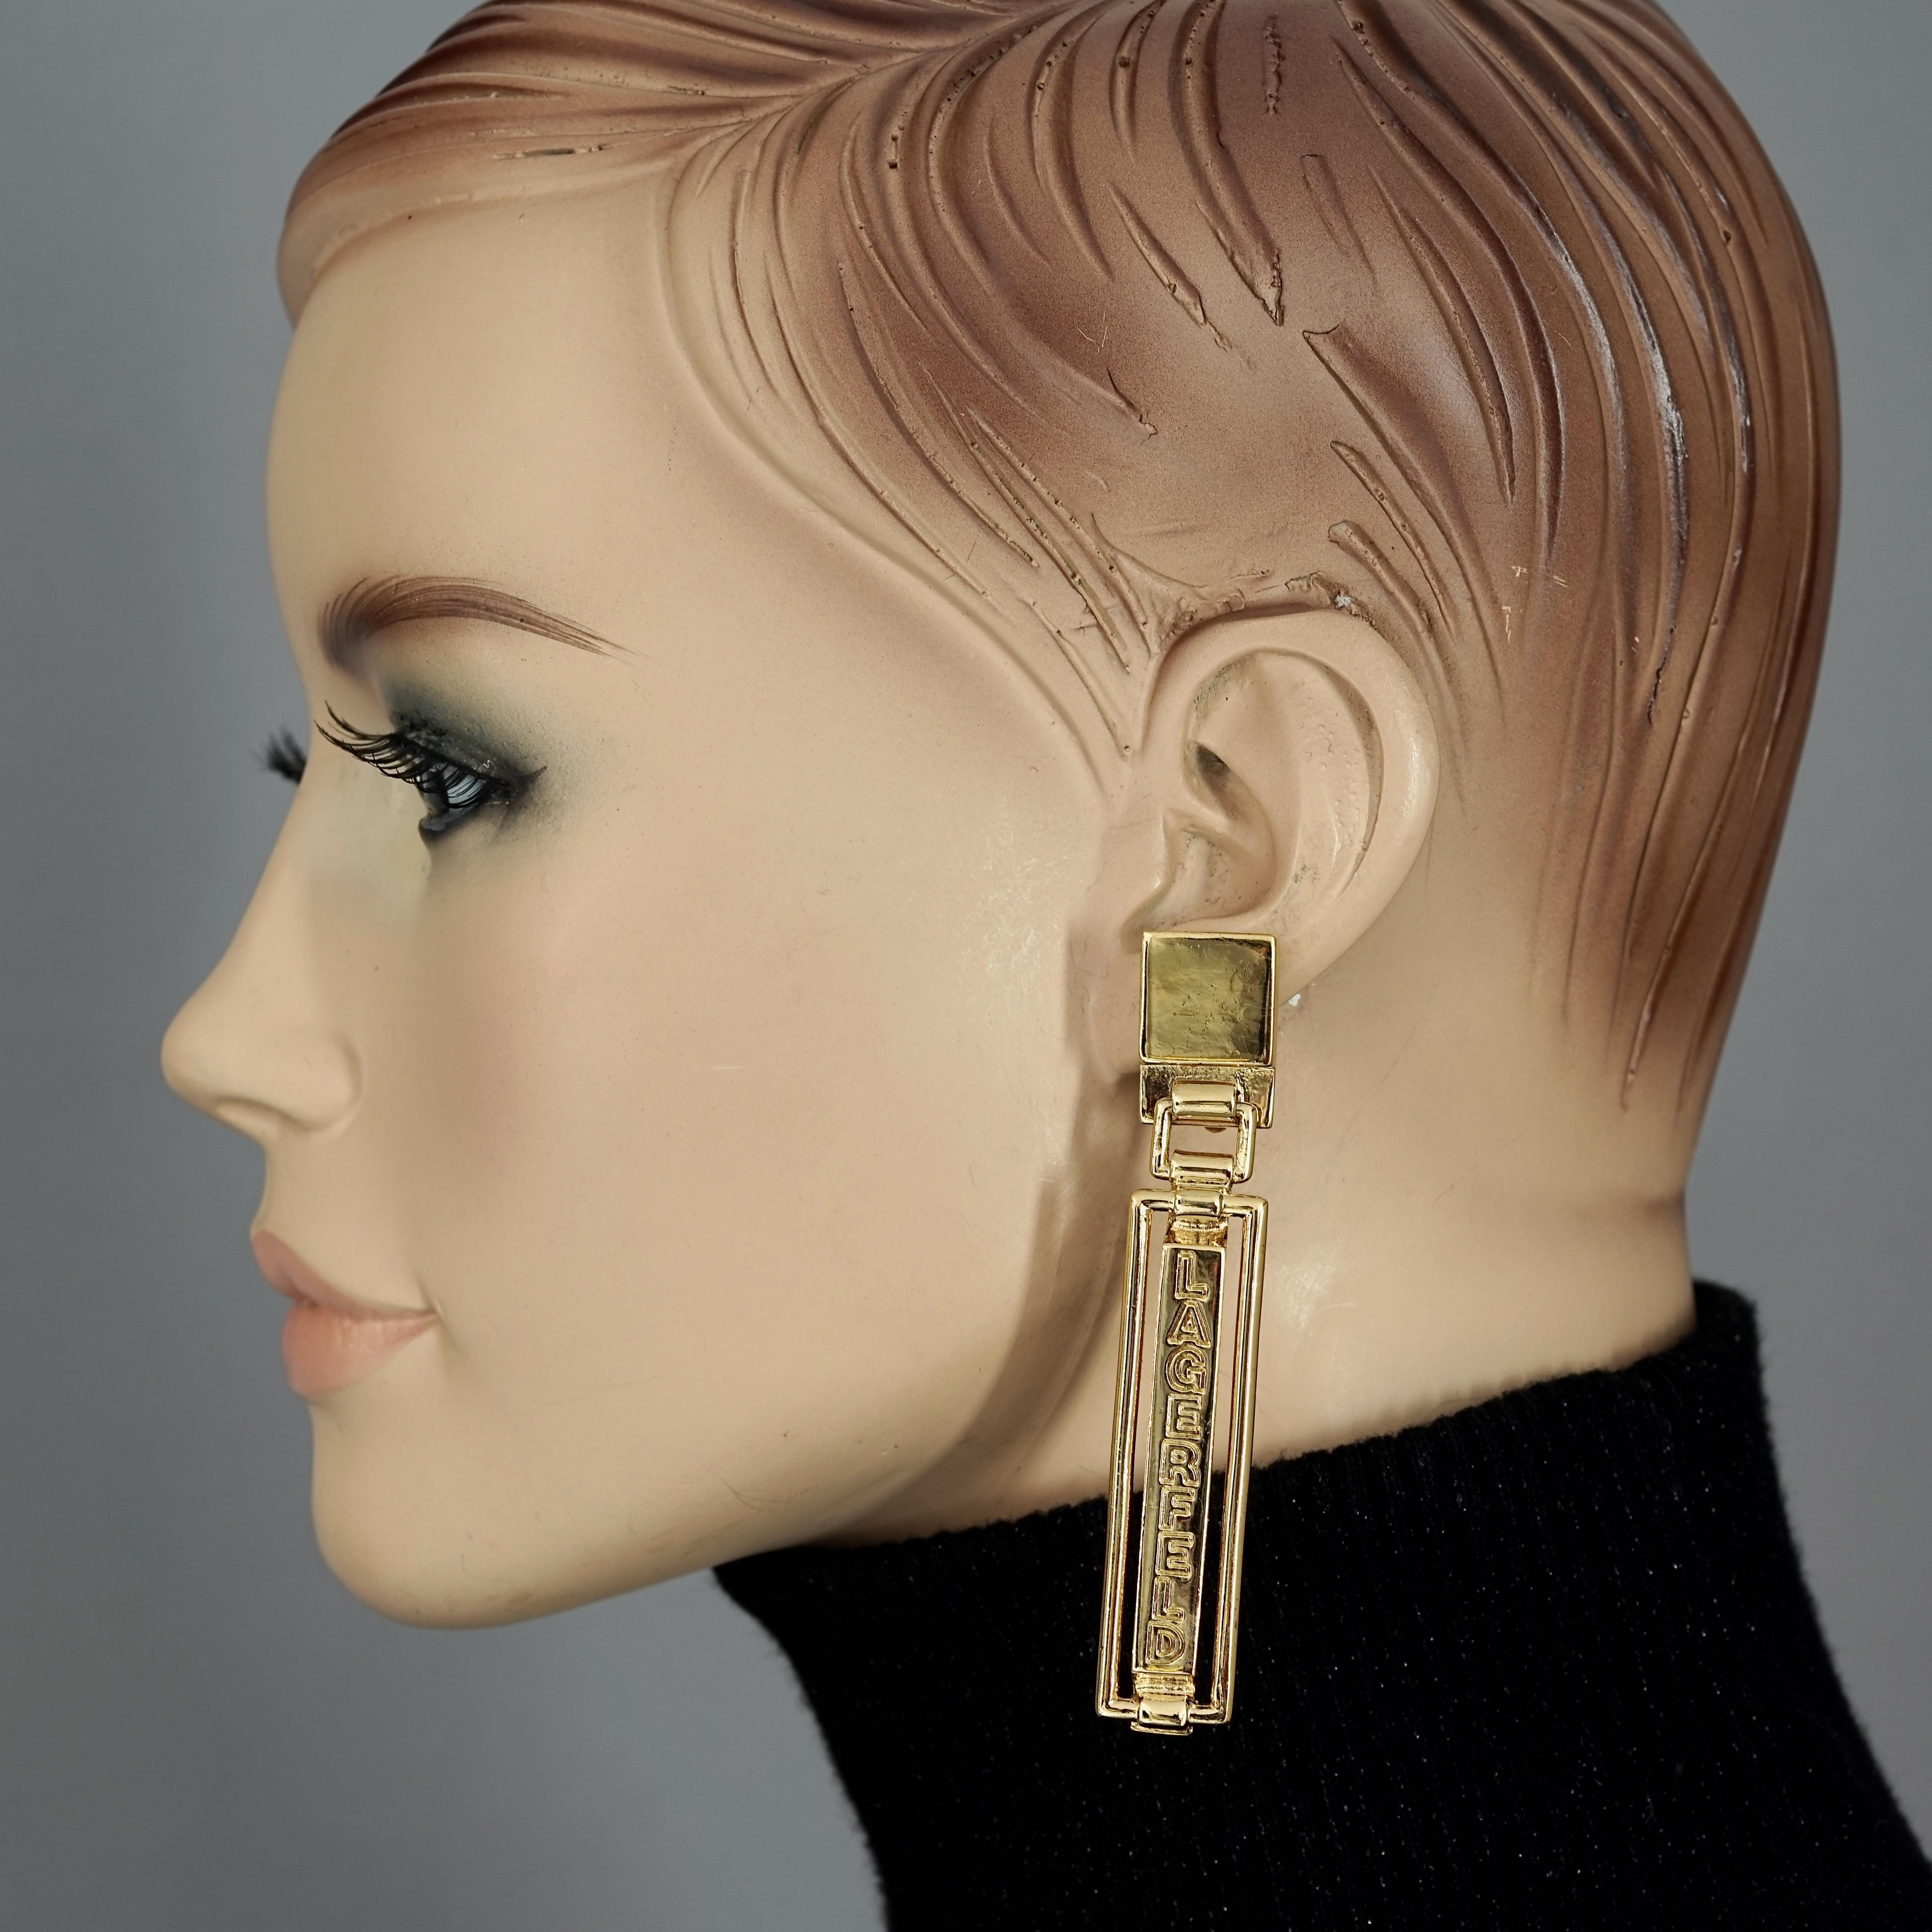 Vintage KARL LAGERFELD Spelled Out Dangling Earrings

Measurements:
Height: 3.35 inches (8.5 cm)
Width: 0.59 inch (1.5 cm)
Weight per Earring: 21 grams

Features:
- 100% Authentic KARL LAGERFELD.
- Dangling rectangular earrings with spelled out